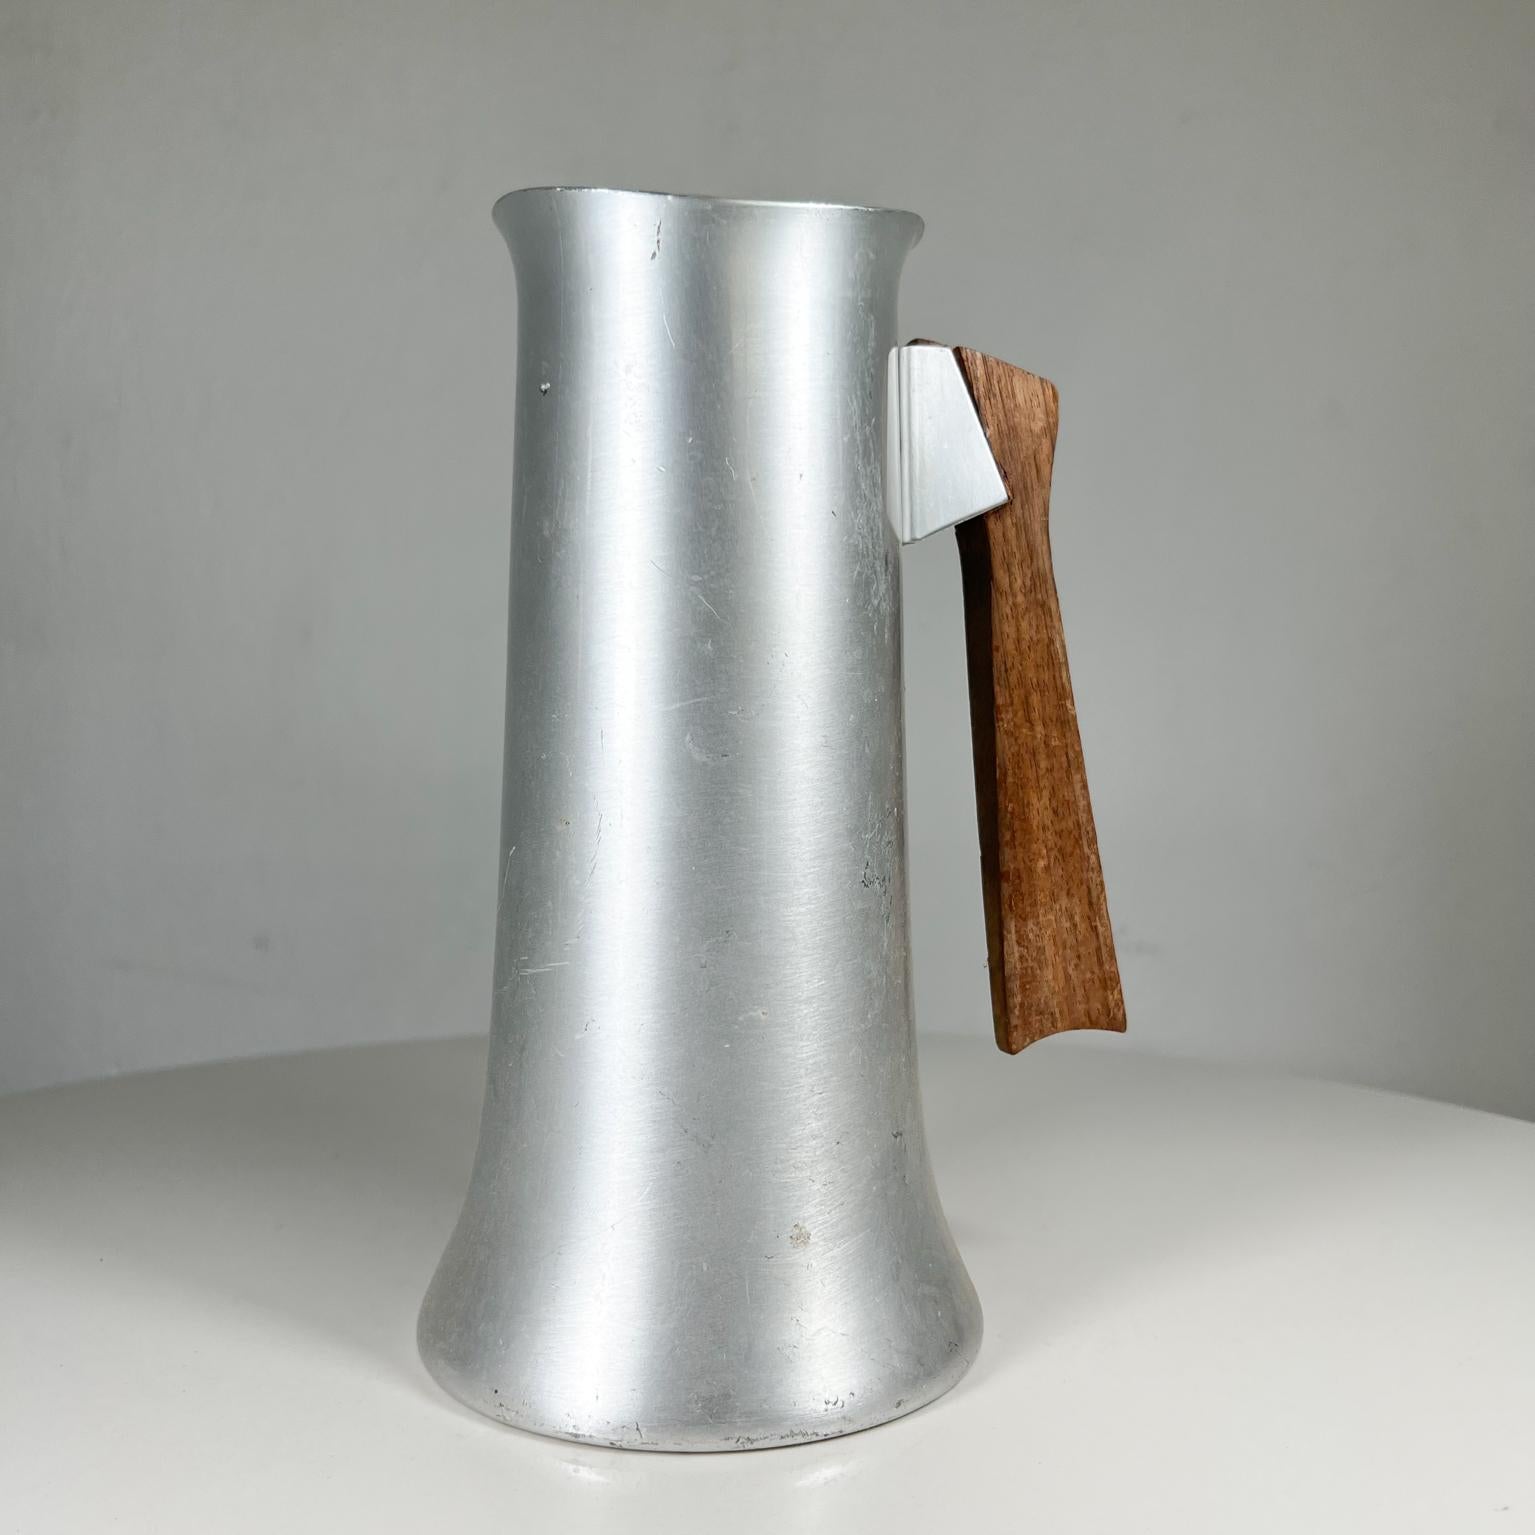 1950s Atomic Mid-Century Modern water pitcher by Medallion Mirro USA
Measures: 8.75 tall x 4.5 diameter x 5.75 deep
Aluminum and teak
Maker stamped.
Preowned unrestored vintage condition
Scratches present.
See all images.